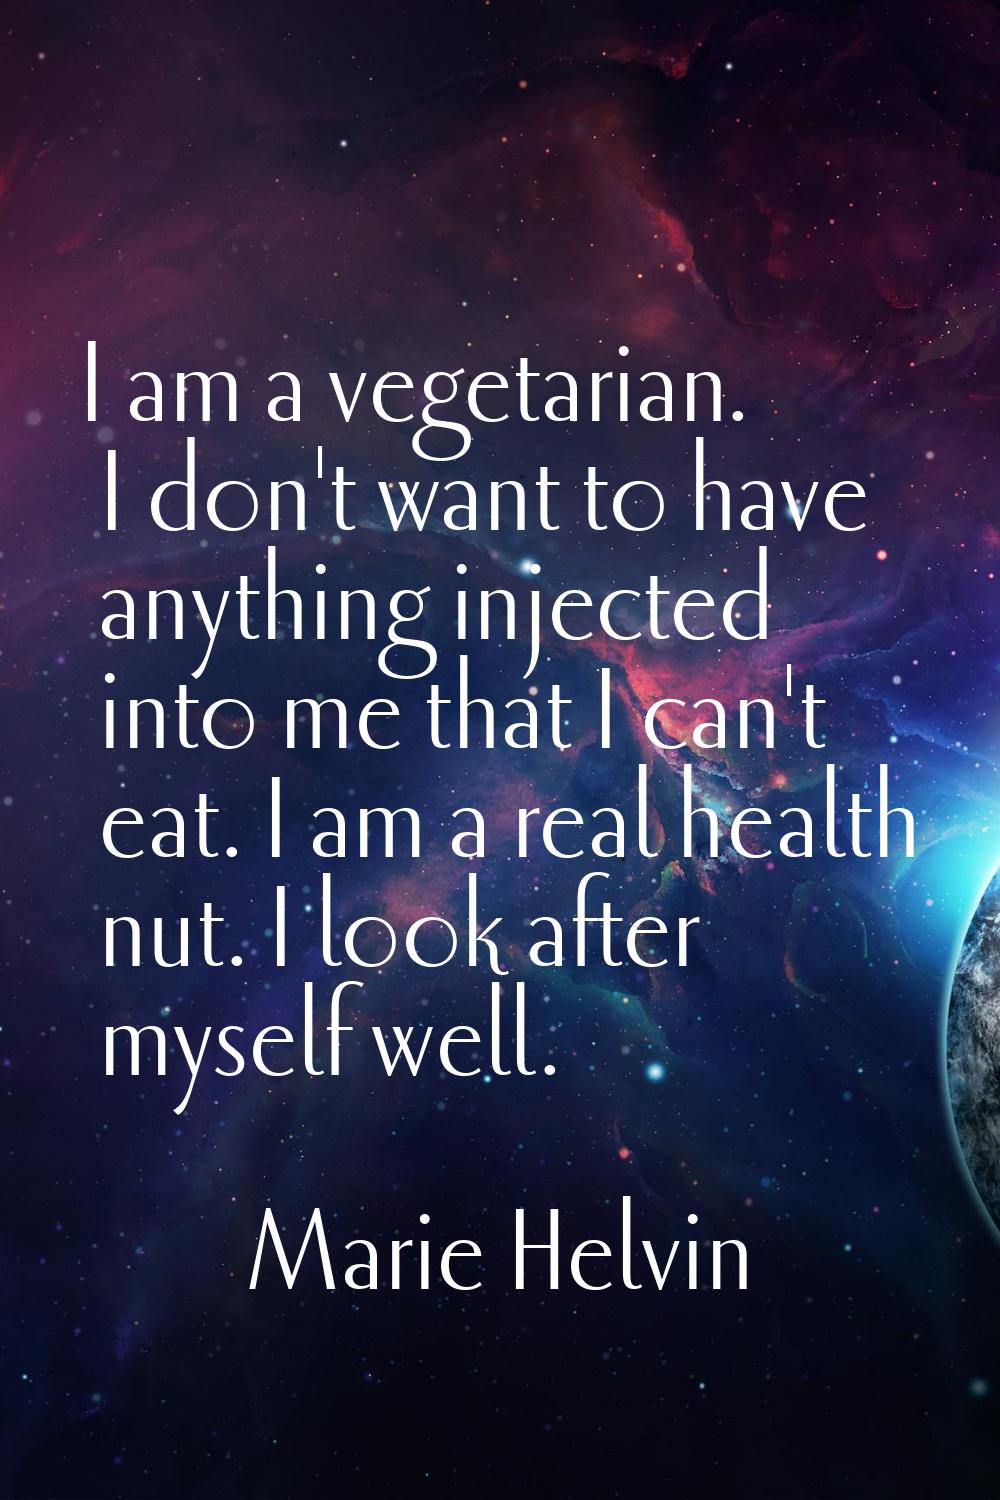 I am a vegetarian. I don't want to have anything injected into me that I can't eat. I am a real hea